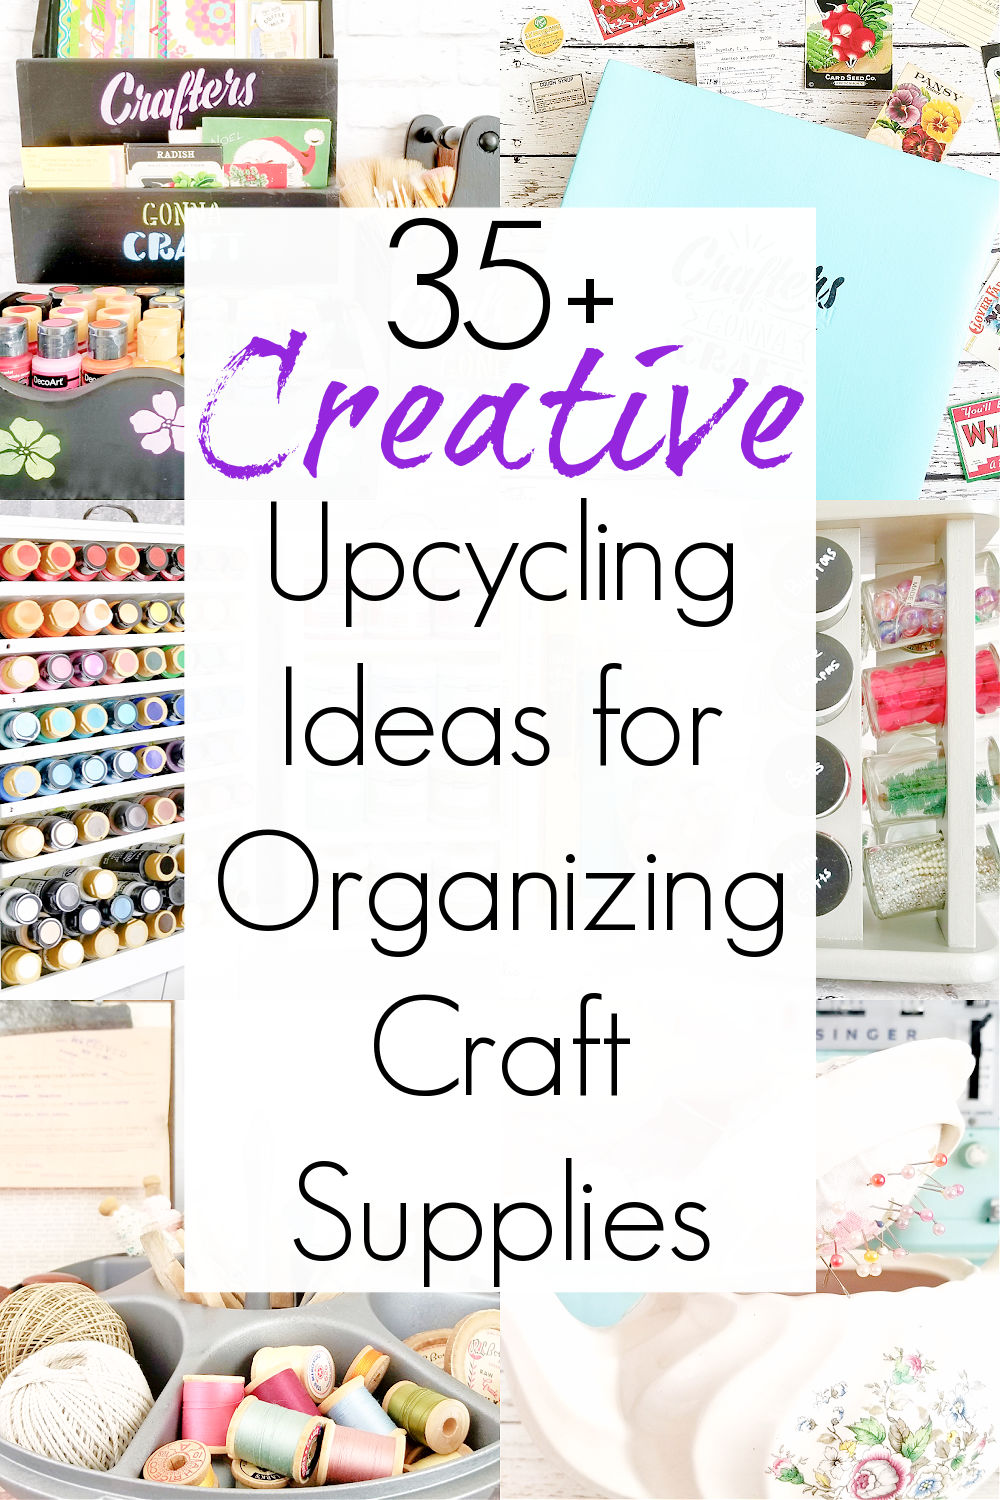 Organizing Craft Supplies with a Paint Brush Holder